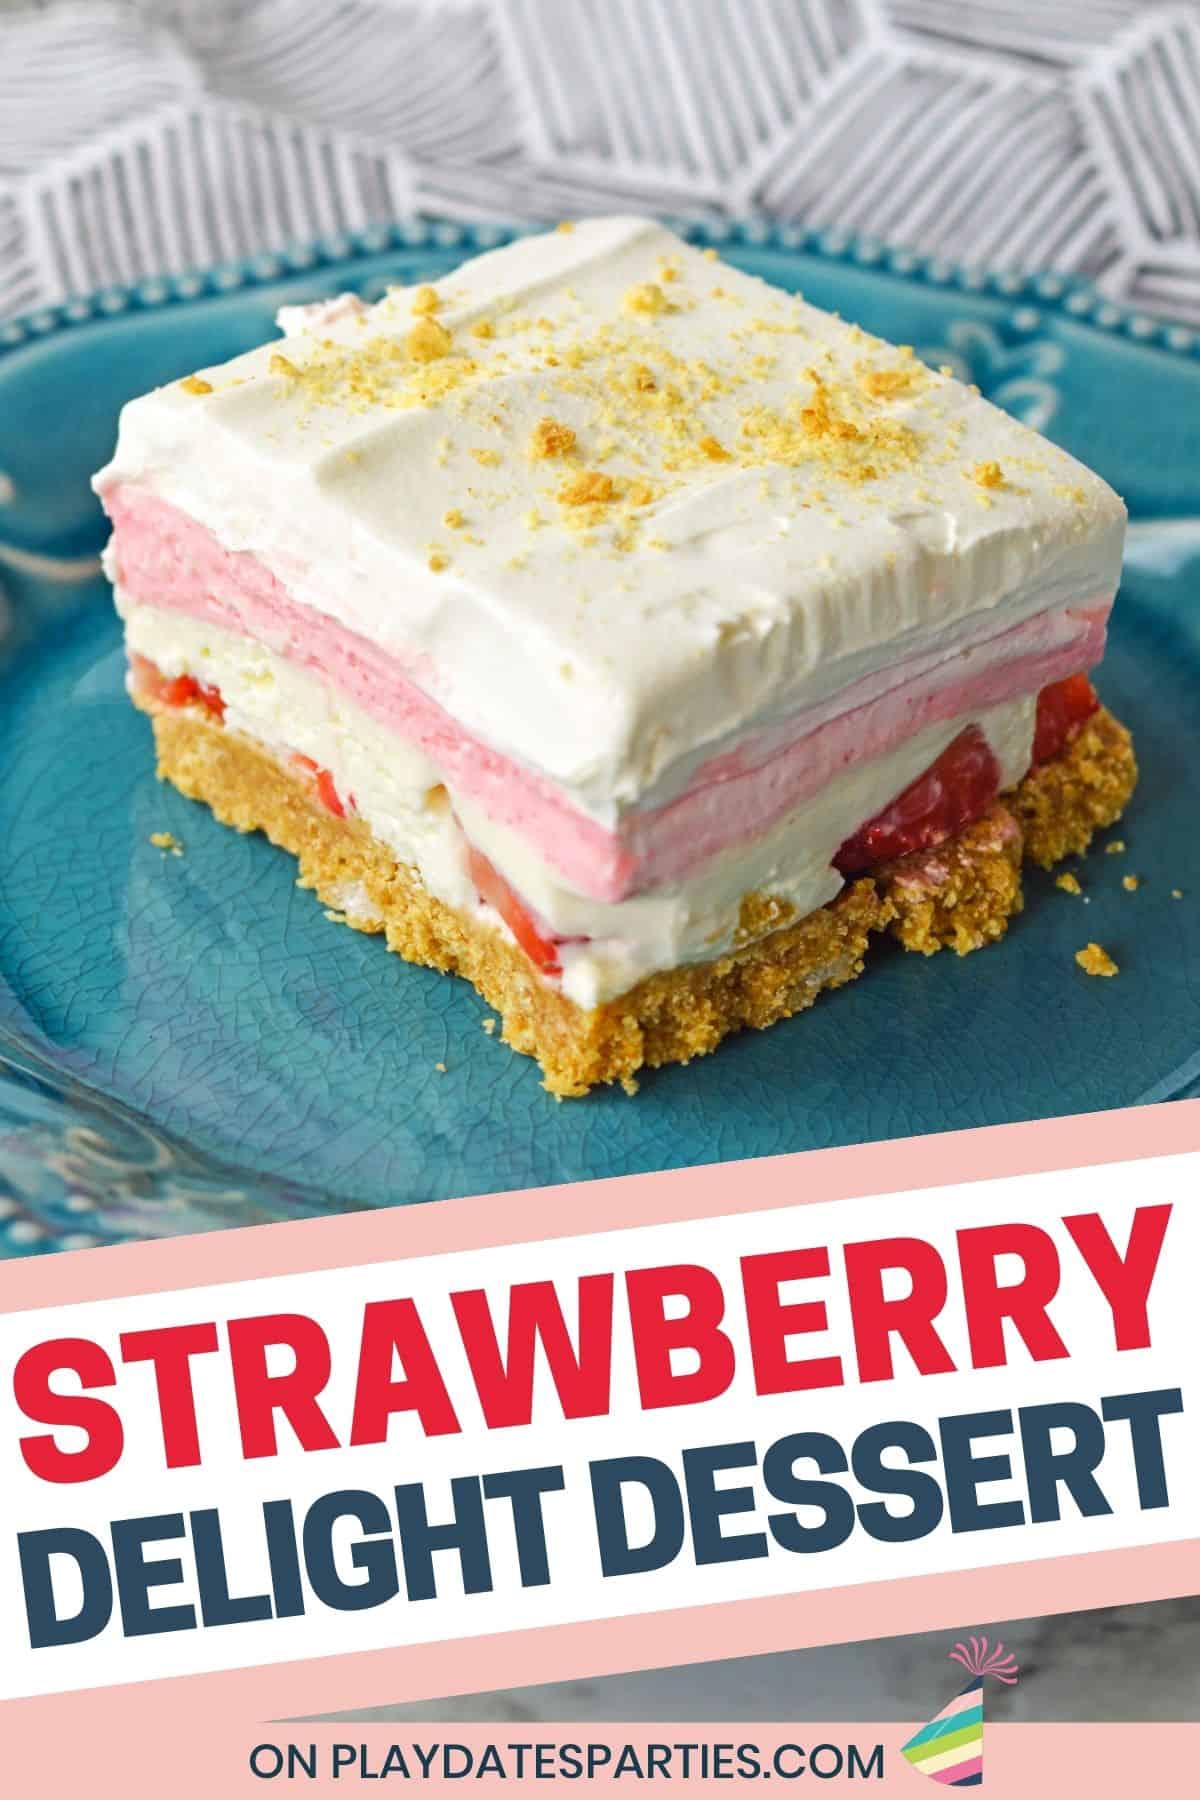 A slice of layered strawberry dessert with a graham cracker crust, fresh strawberries, and no bake cheesecake filling.